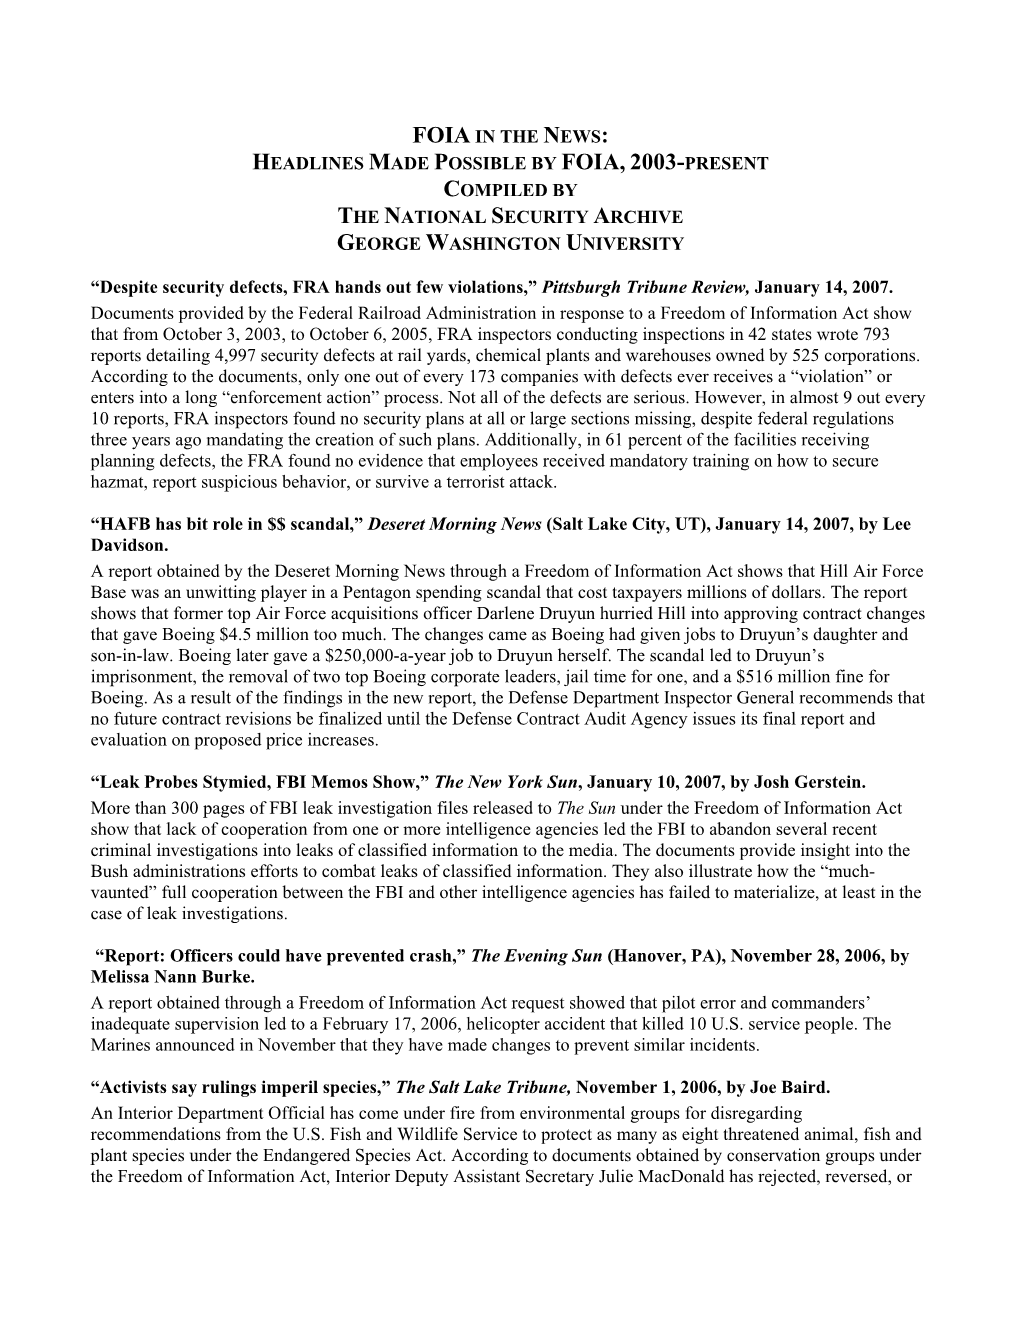 Foia in the News: Headlines Made Possible by Foia, 2003-Present Compiled by the National Security Archive George Washington University